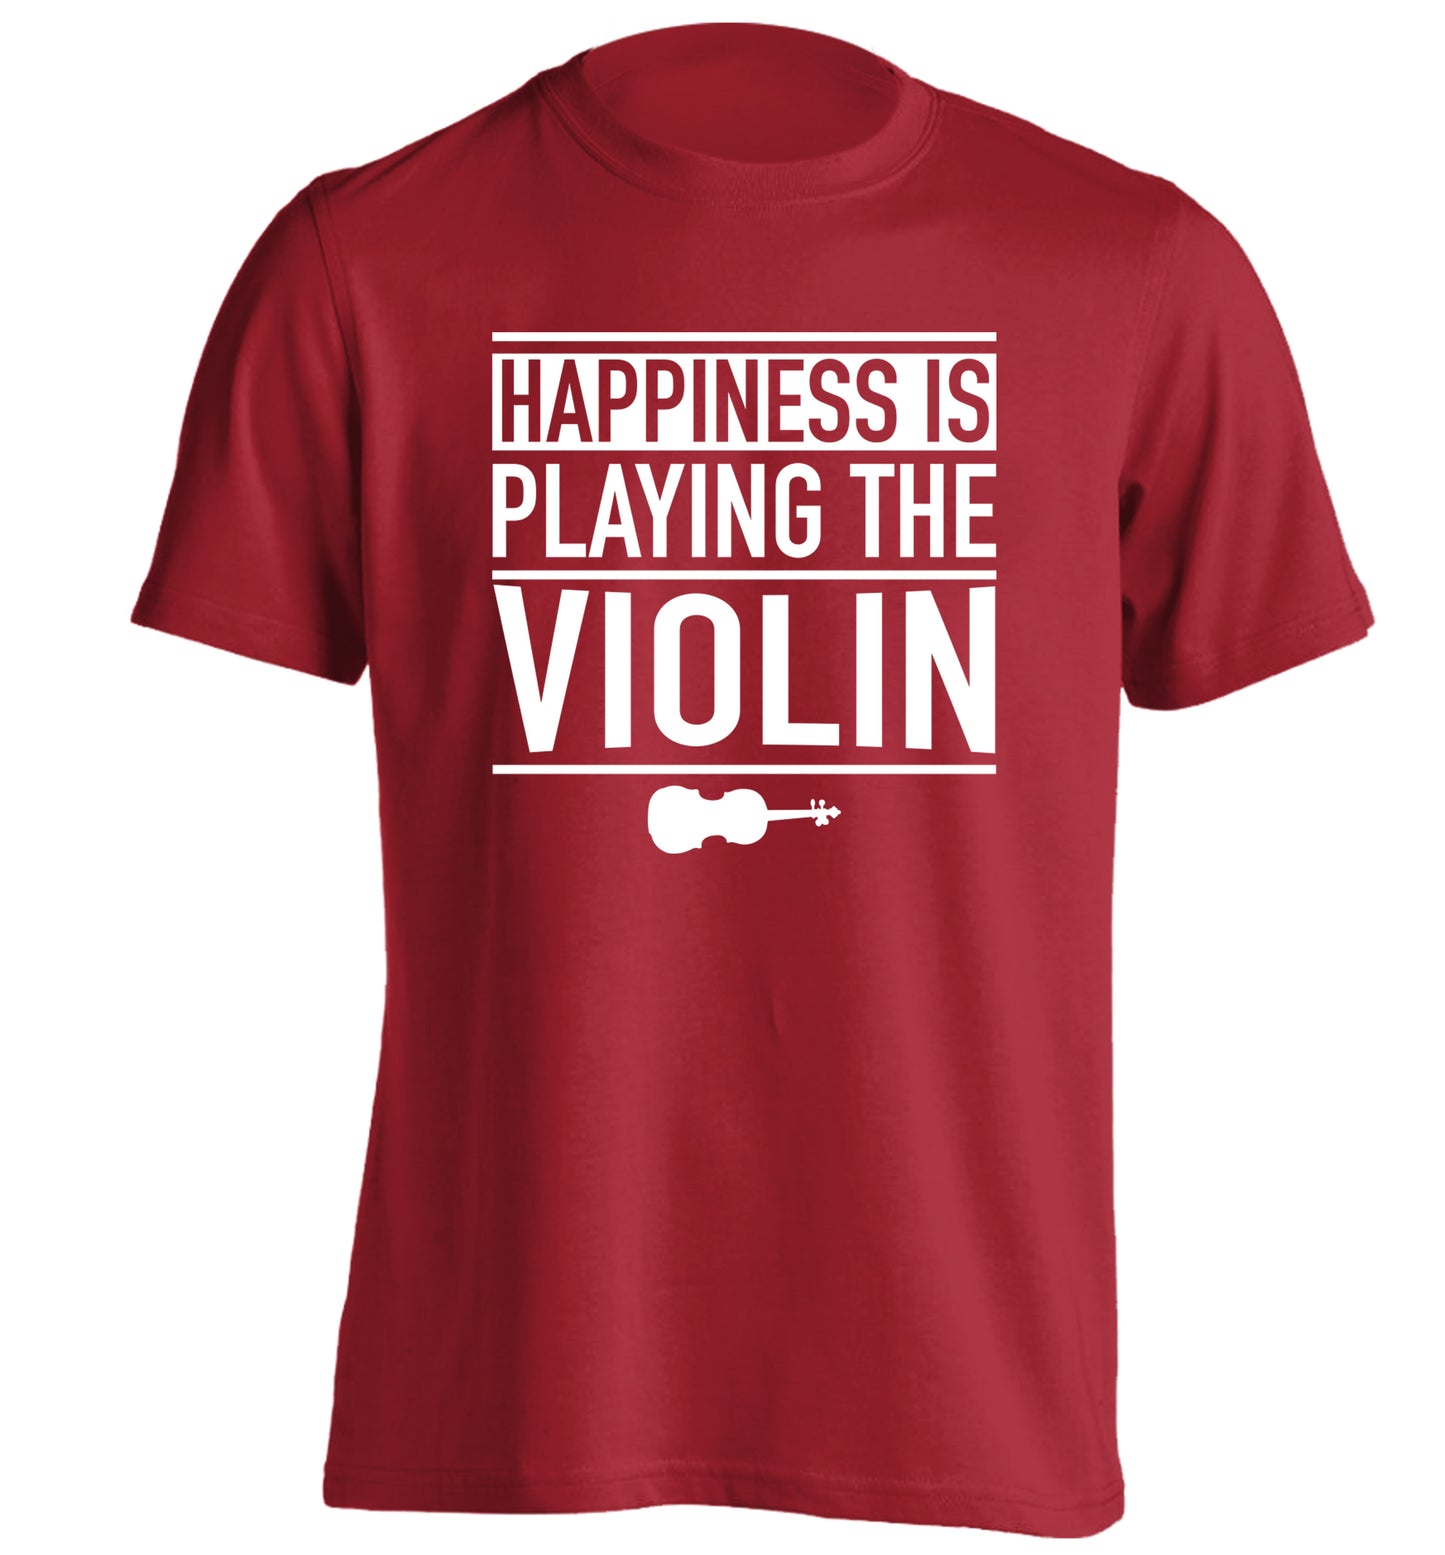 Happiness is playing the violin adults unisex red Tshirt 2XL